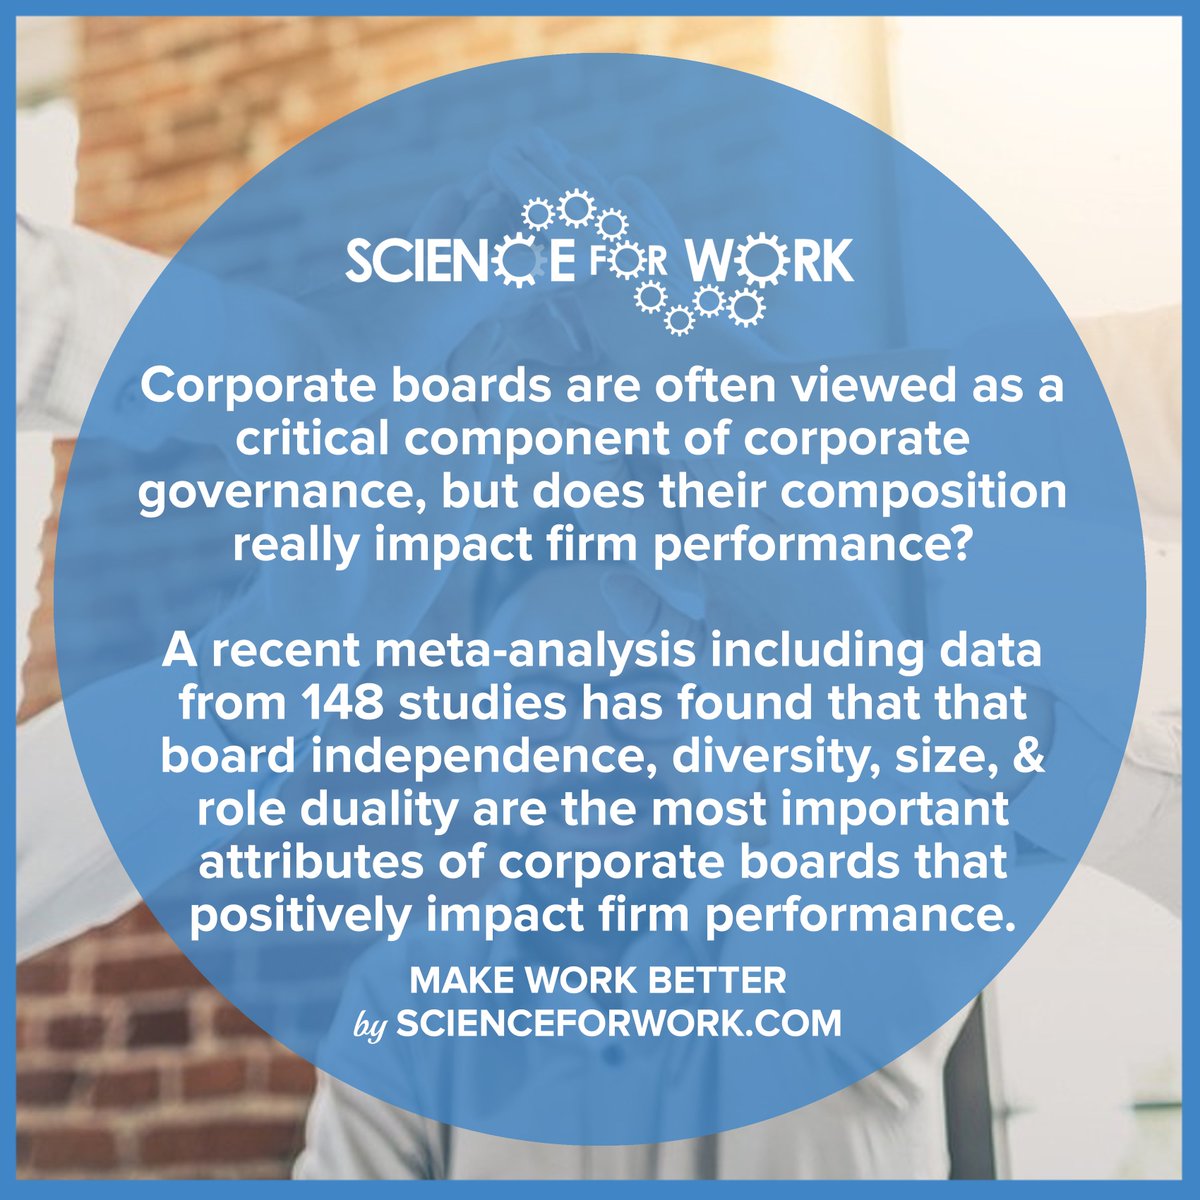 #MakeWorkBetter with #scienceforwork ⚗😁🔍
Produced by @A_J_Halliday

Read the source here:
lnkd.in/gsJ-Dxg2

#HR #Management #Leadership #Diversity #work #MGMT #boards #governance #corporateboards #leaders #HR #EBM